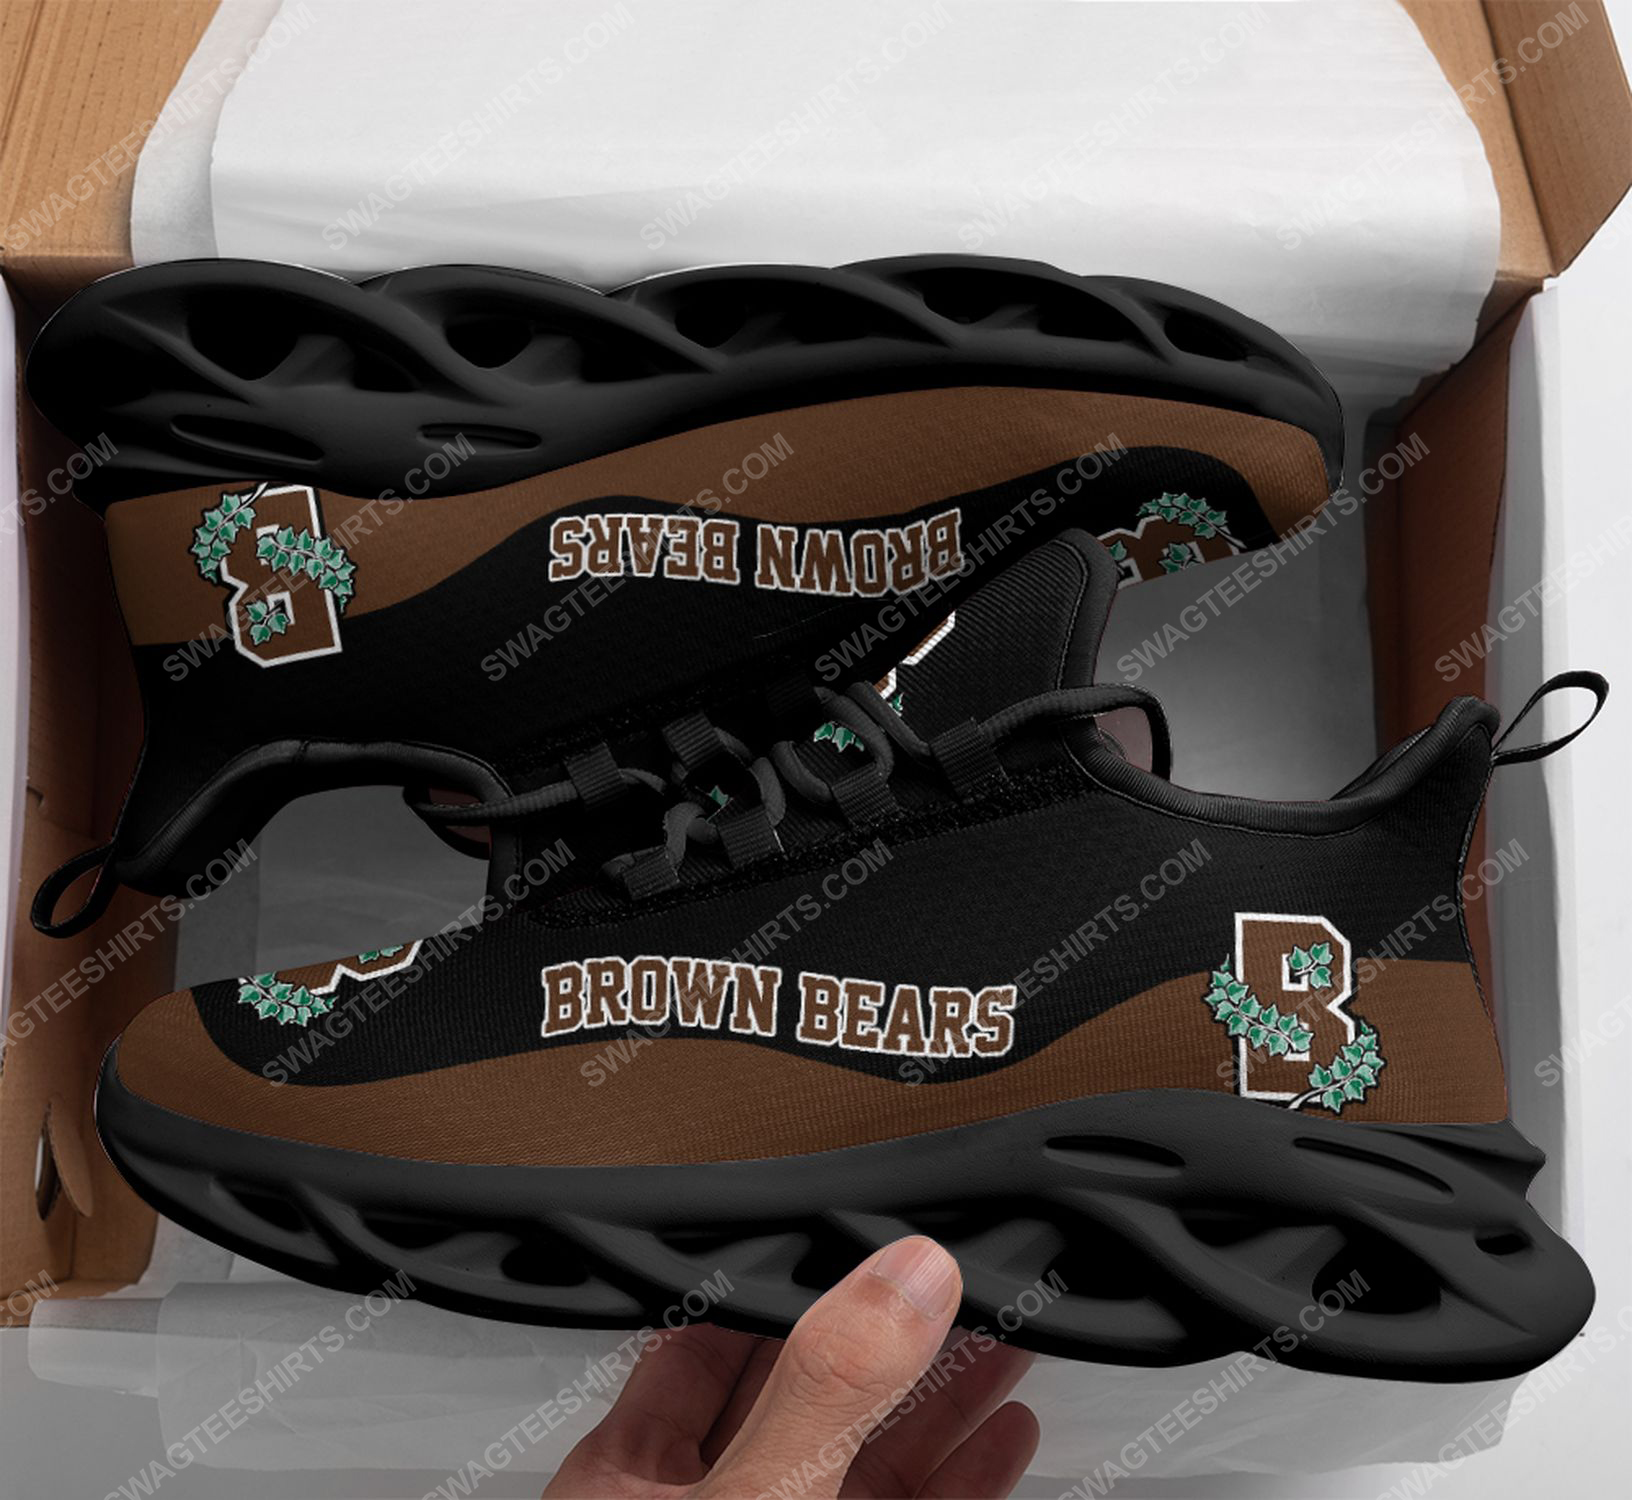 The brown bears football team max soul shoes 3